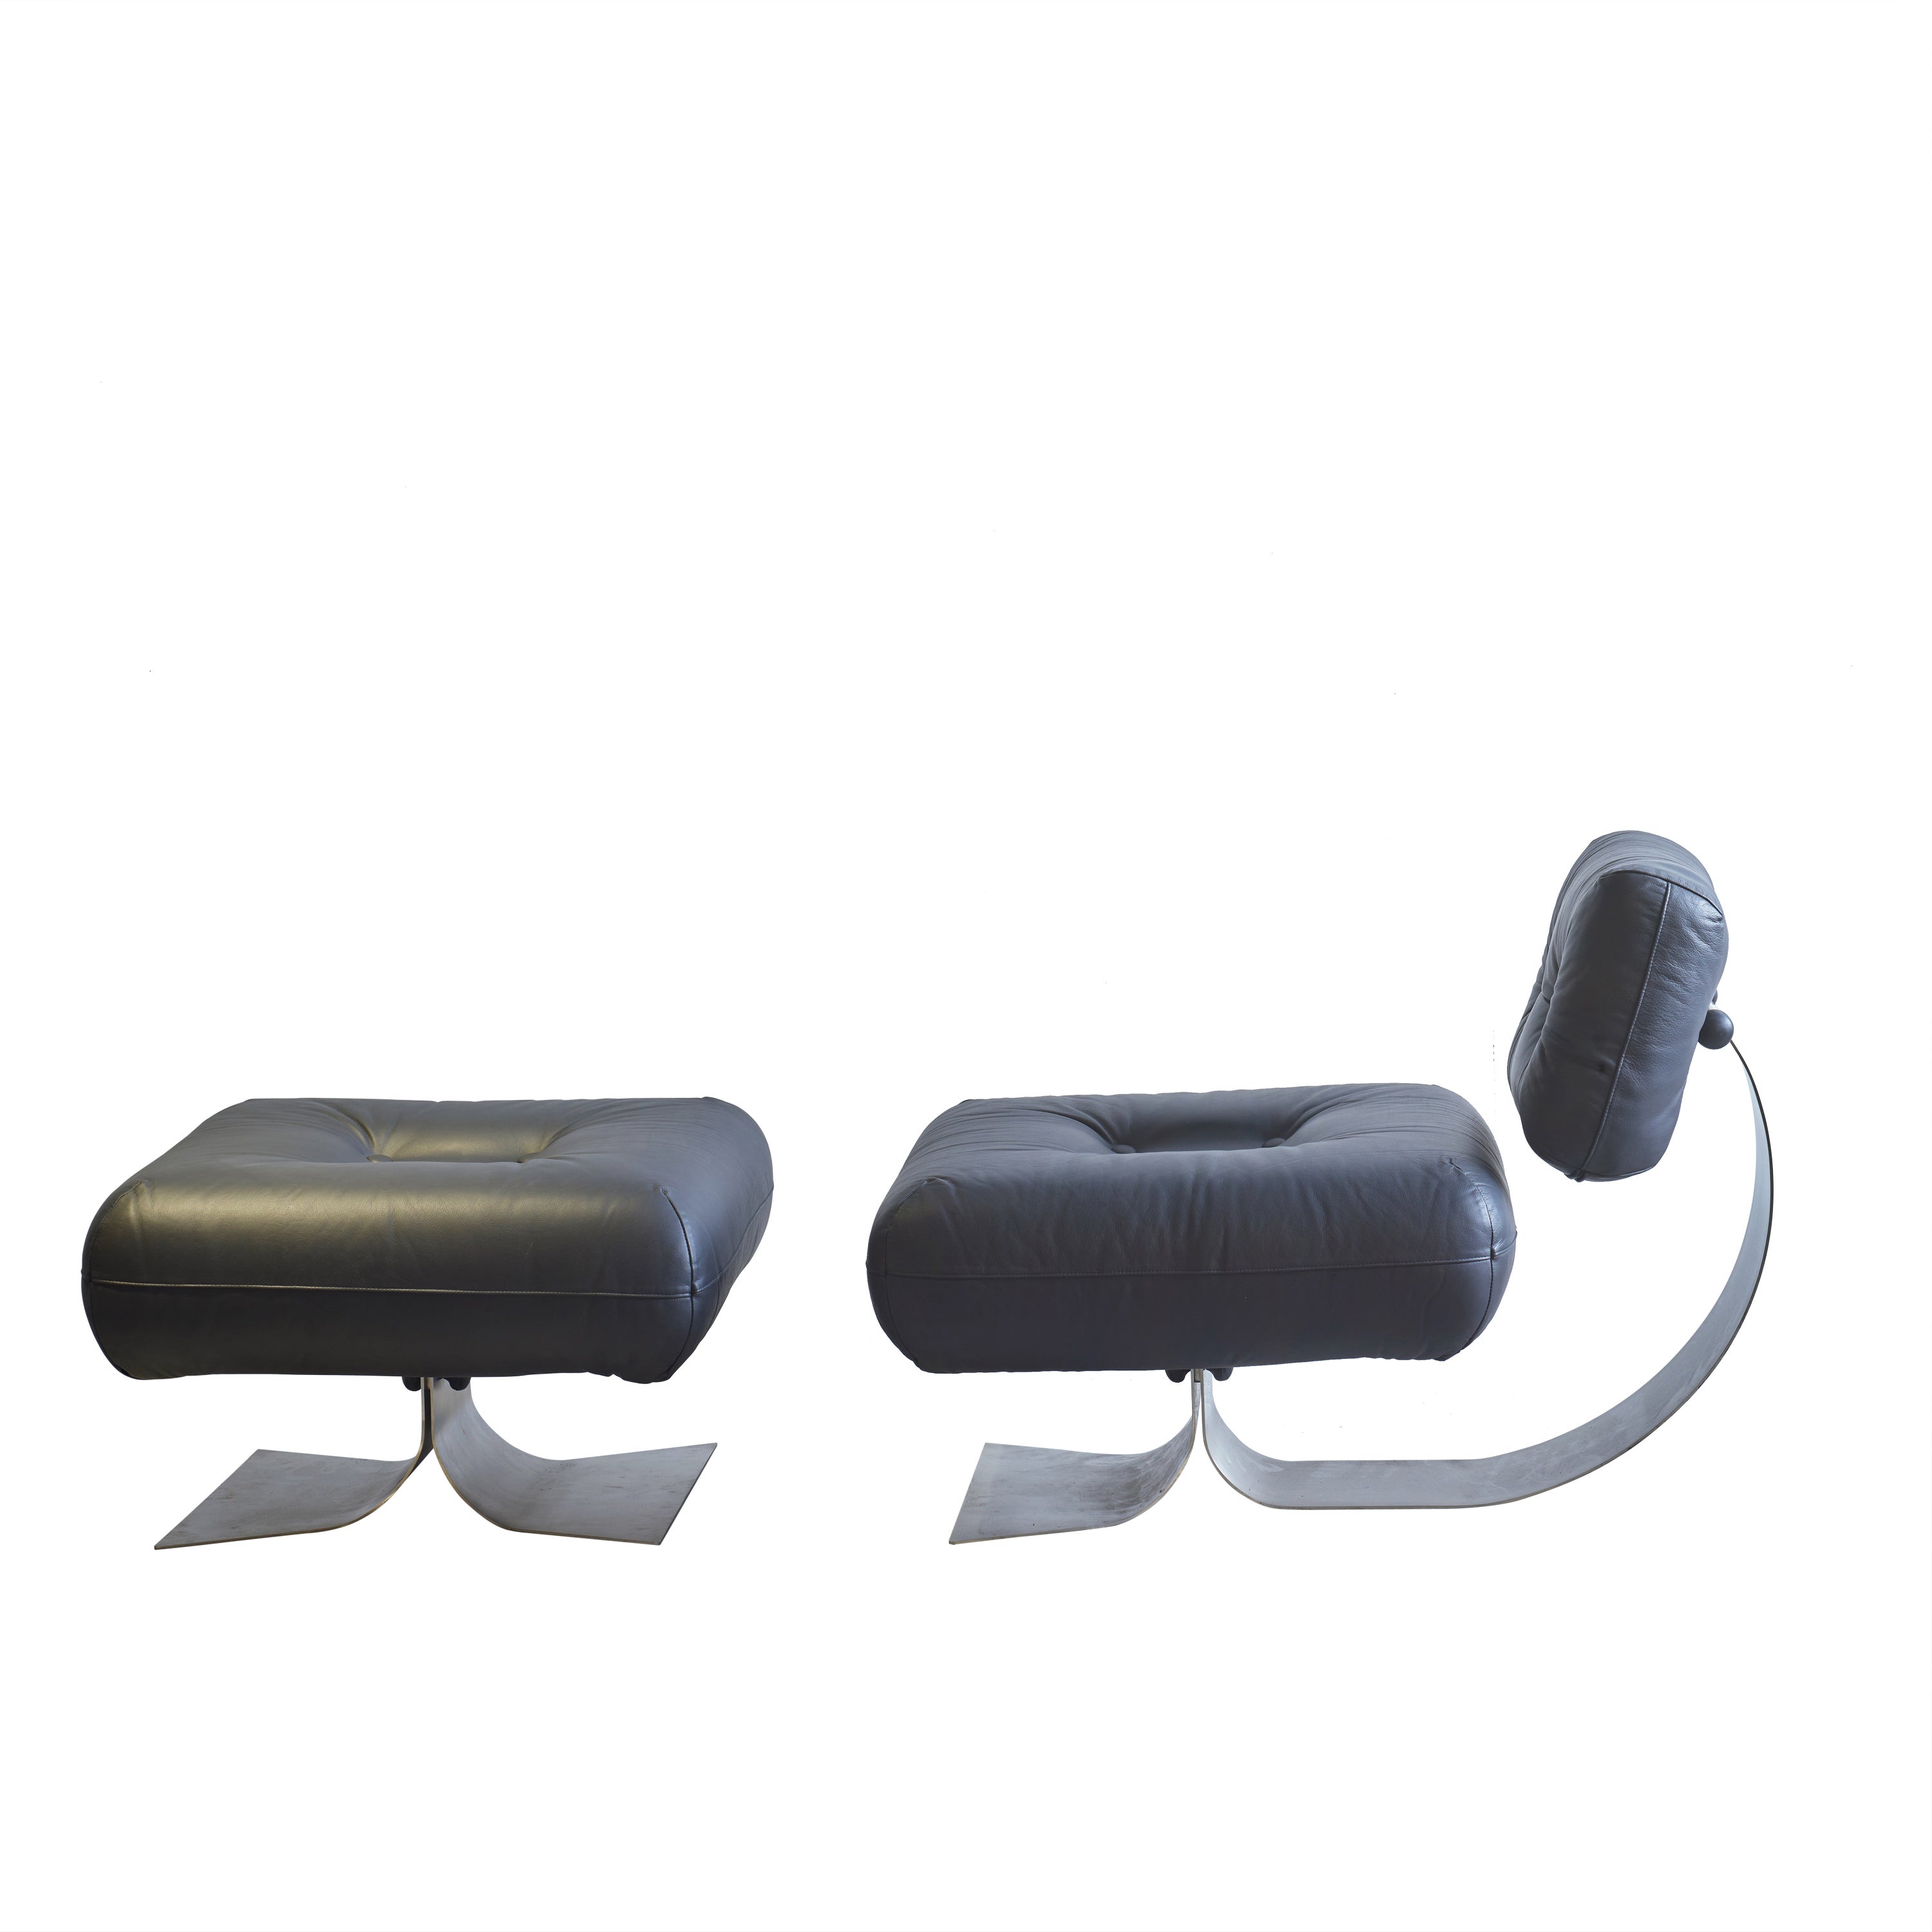 Lounger and ottoman "Alta" by Oscar Niemeyer / Authentic For Sale